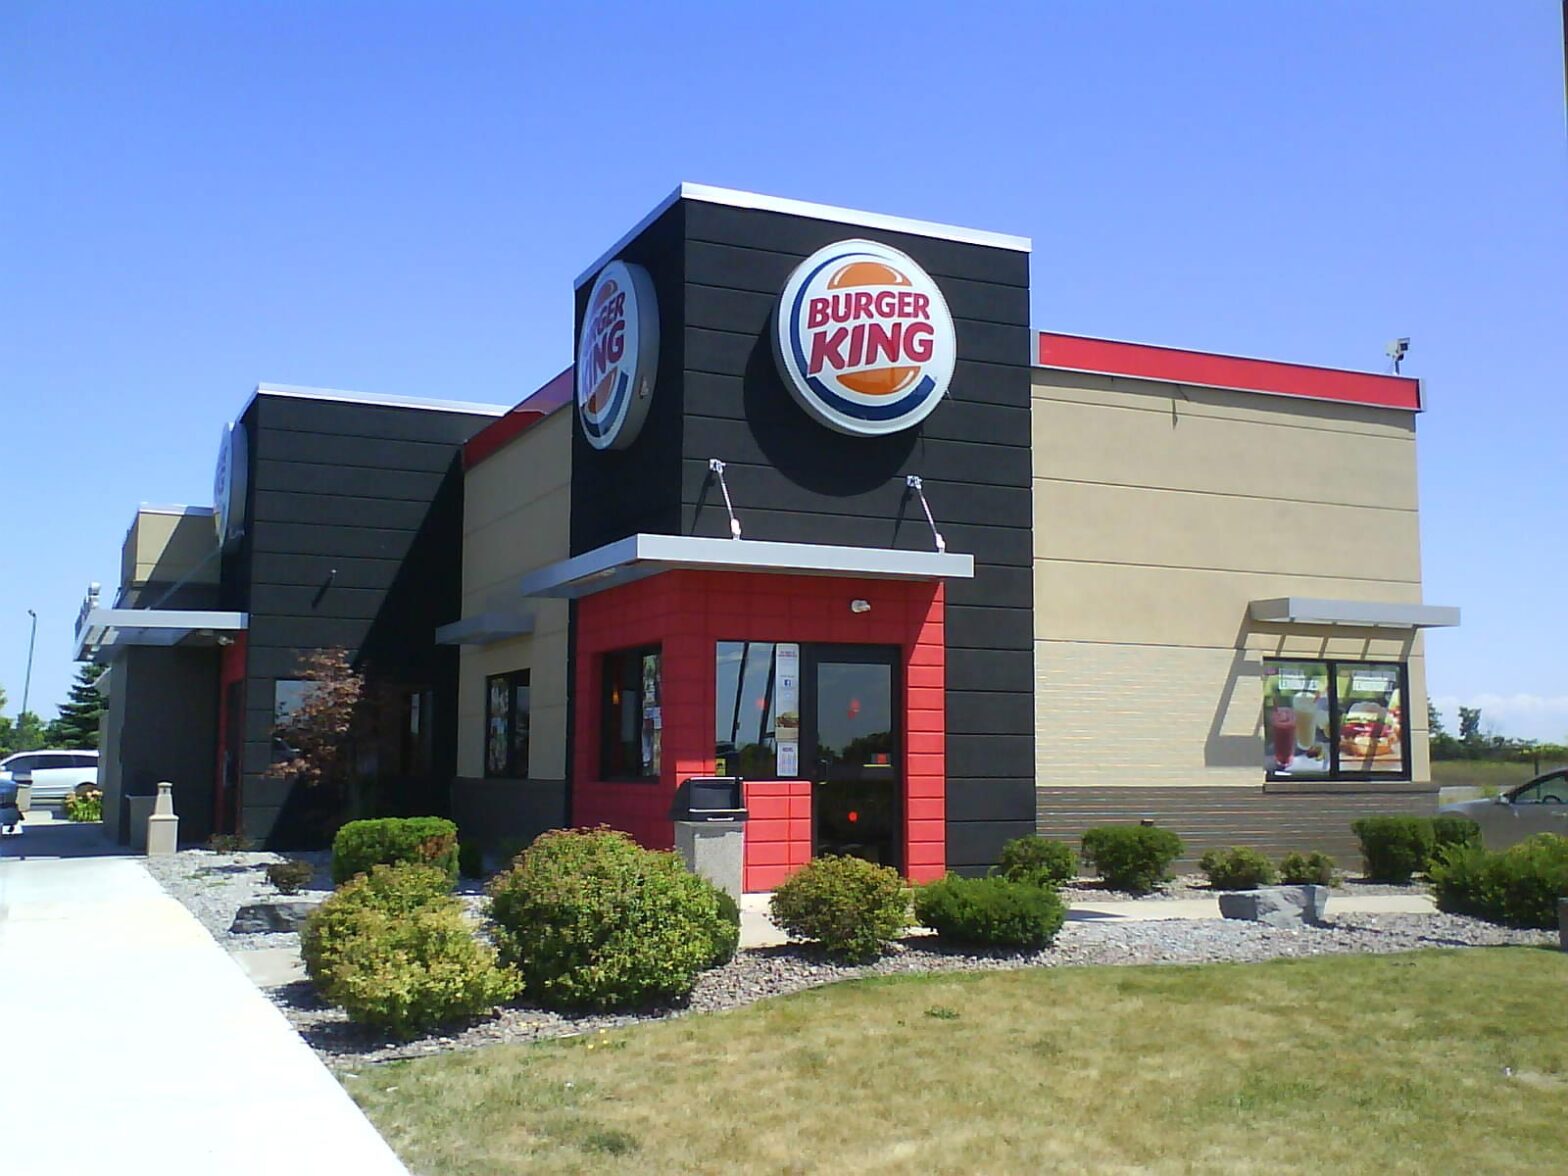 EnergyWise LED Lighting Improves Tennessee Burger King Facelift